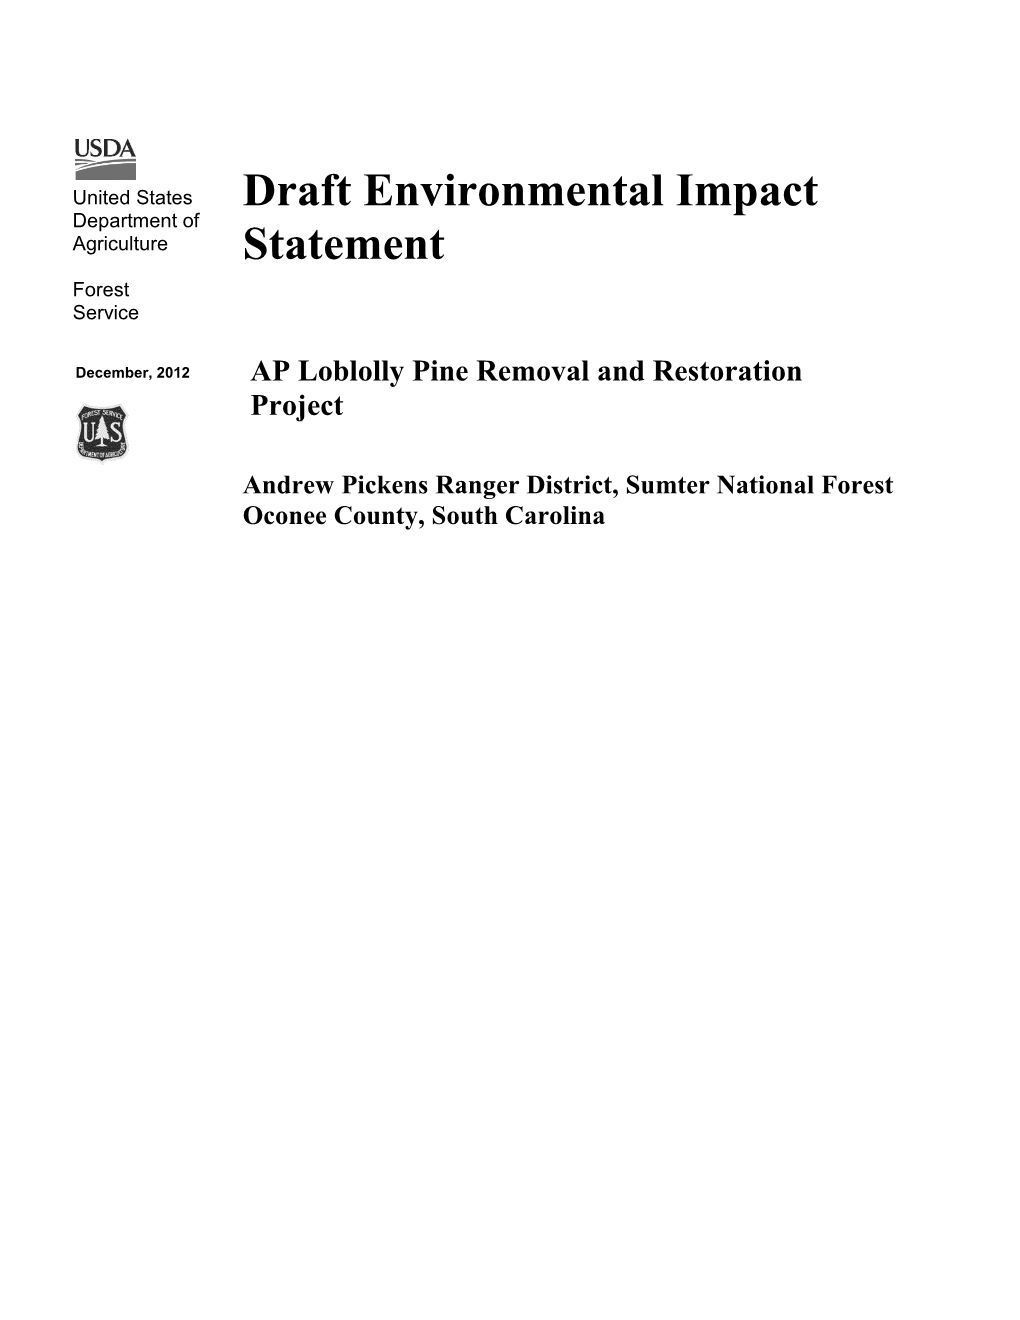 AP Loblolly Pine Removal and Restoration Project Draft Environmental Impact Statement Oconee County, South Carolina